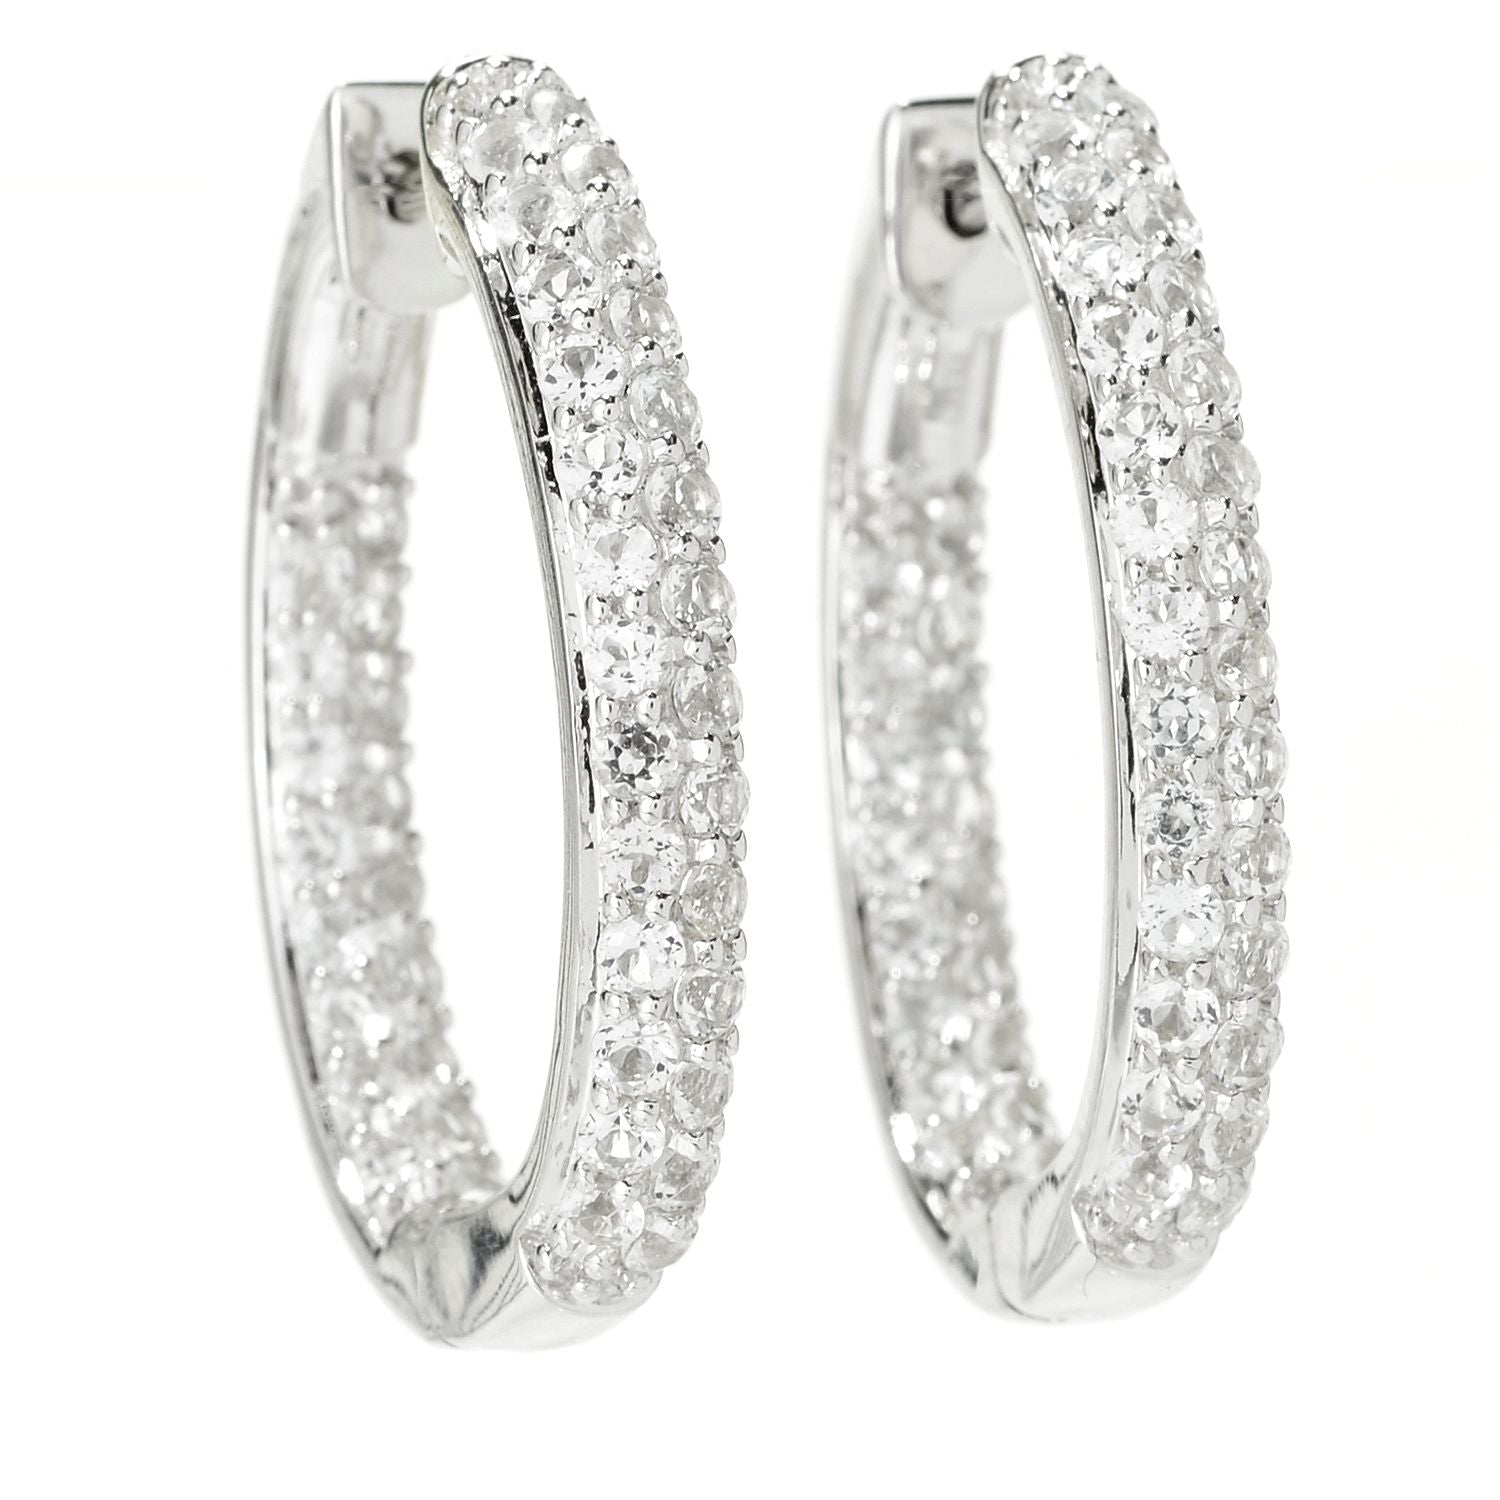 Pinctore Sterling Silver Pave White Topaz Inside-out Hoop Earrings - pinctore